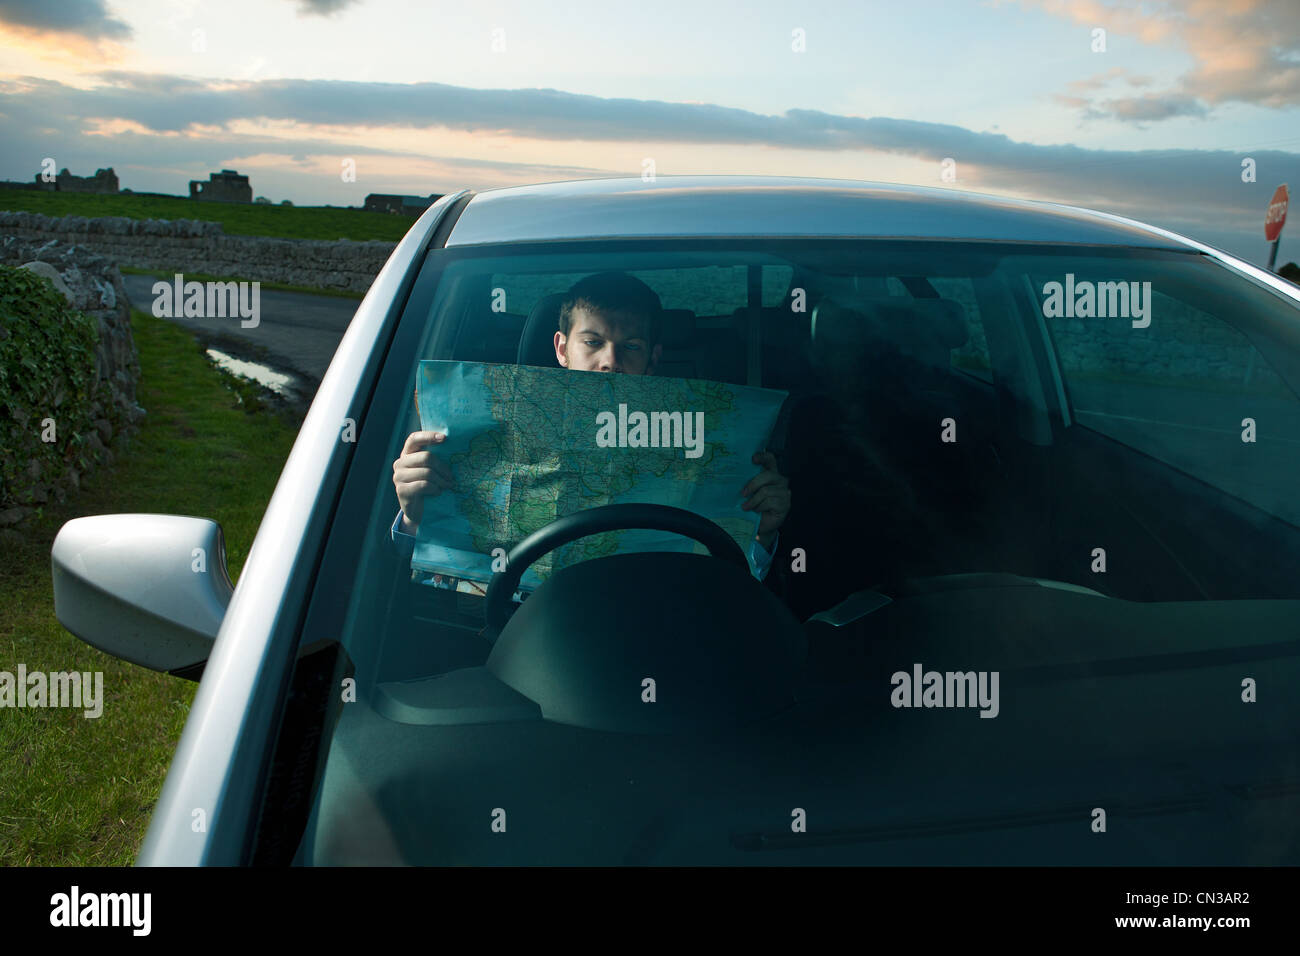 Businessman reading map in car Stock Photo